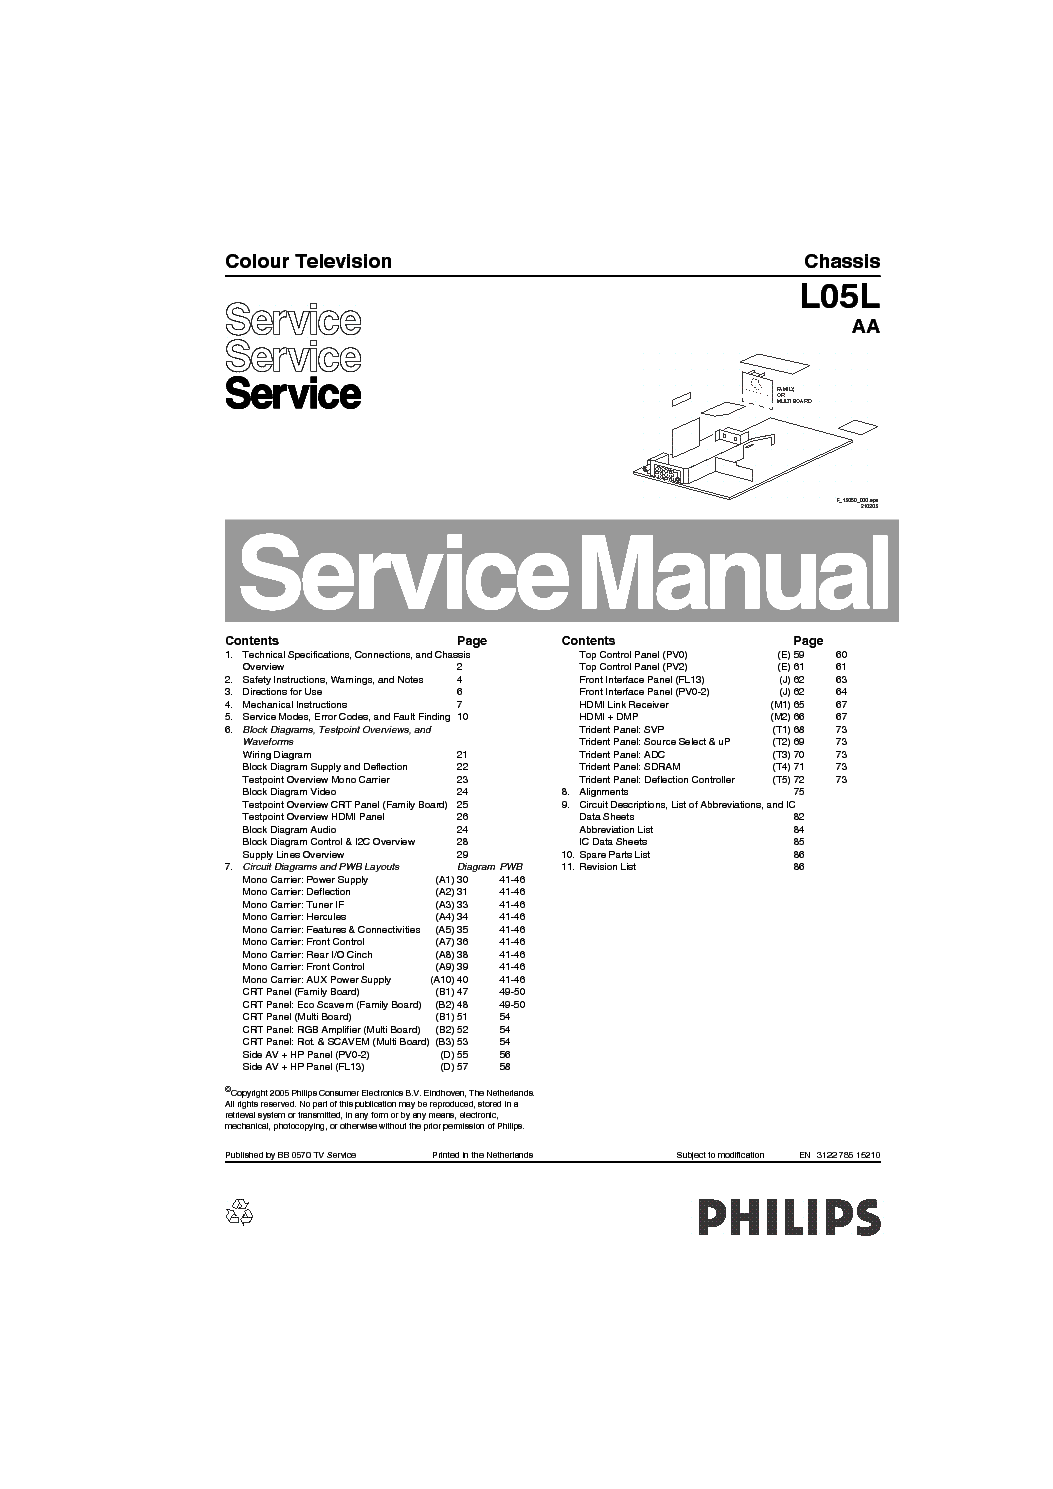 PHILIPS L05L-AA-CHASSIS service manual (1st page)